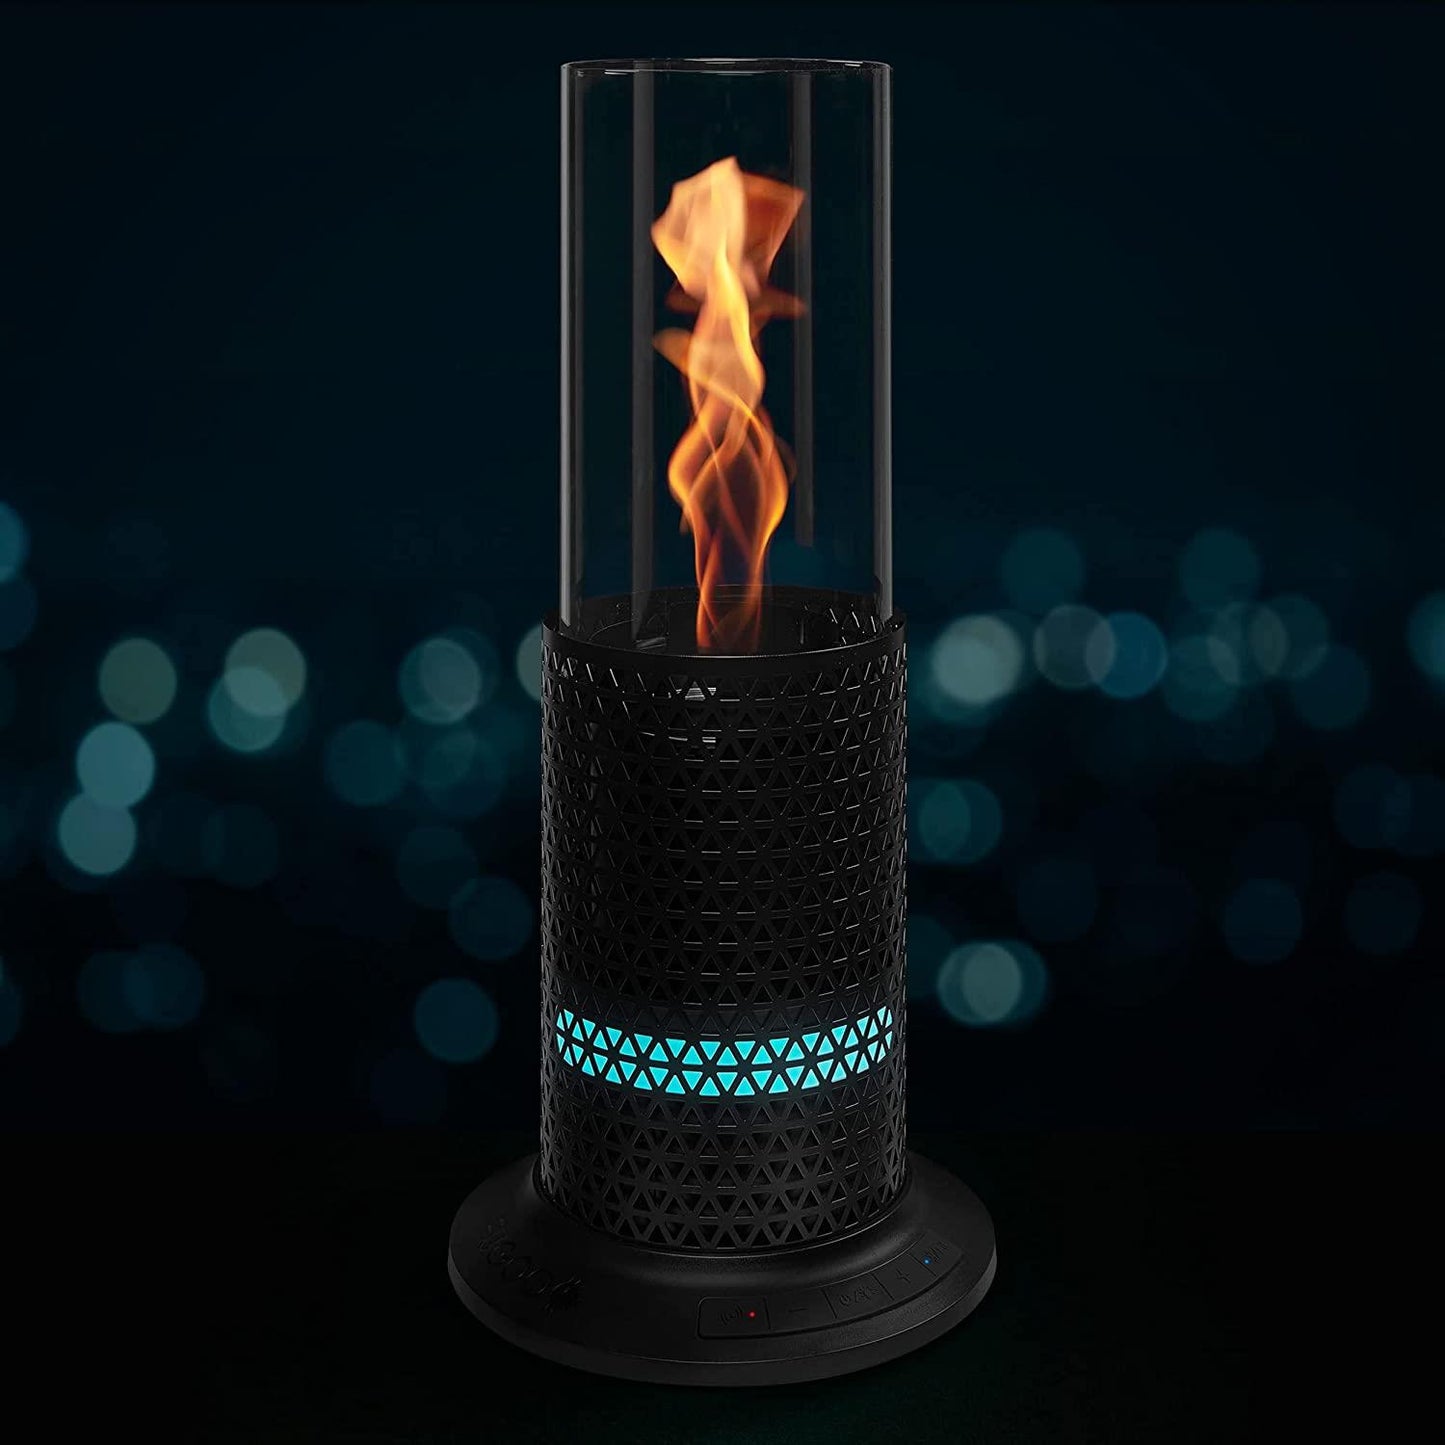 FUGOO Inferno - Portable Bluetooth Speaker & Glass Top Lantern w/Real Flame Lighting - Water-Resistant Outdoor/Indoor Use / 360 Sound